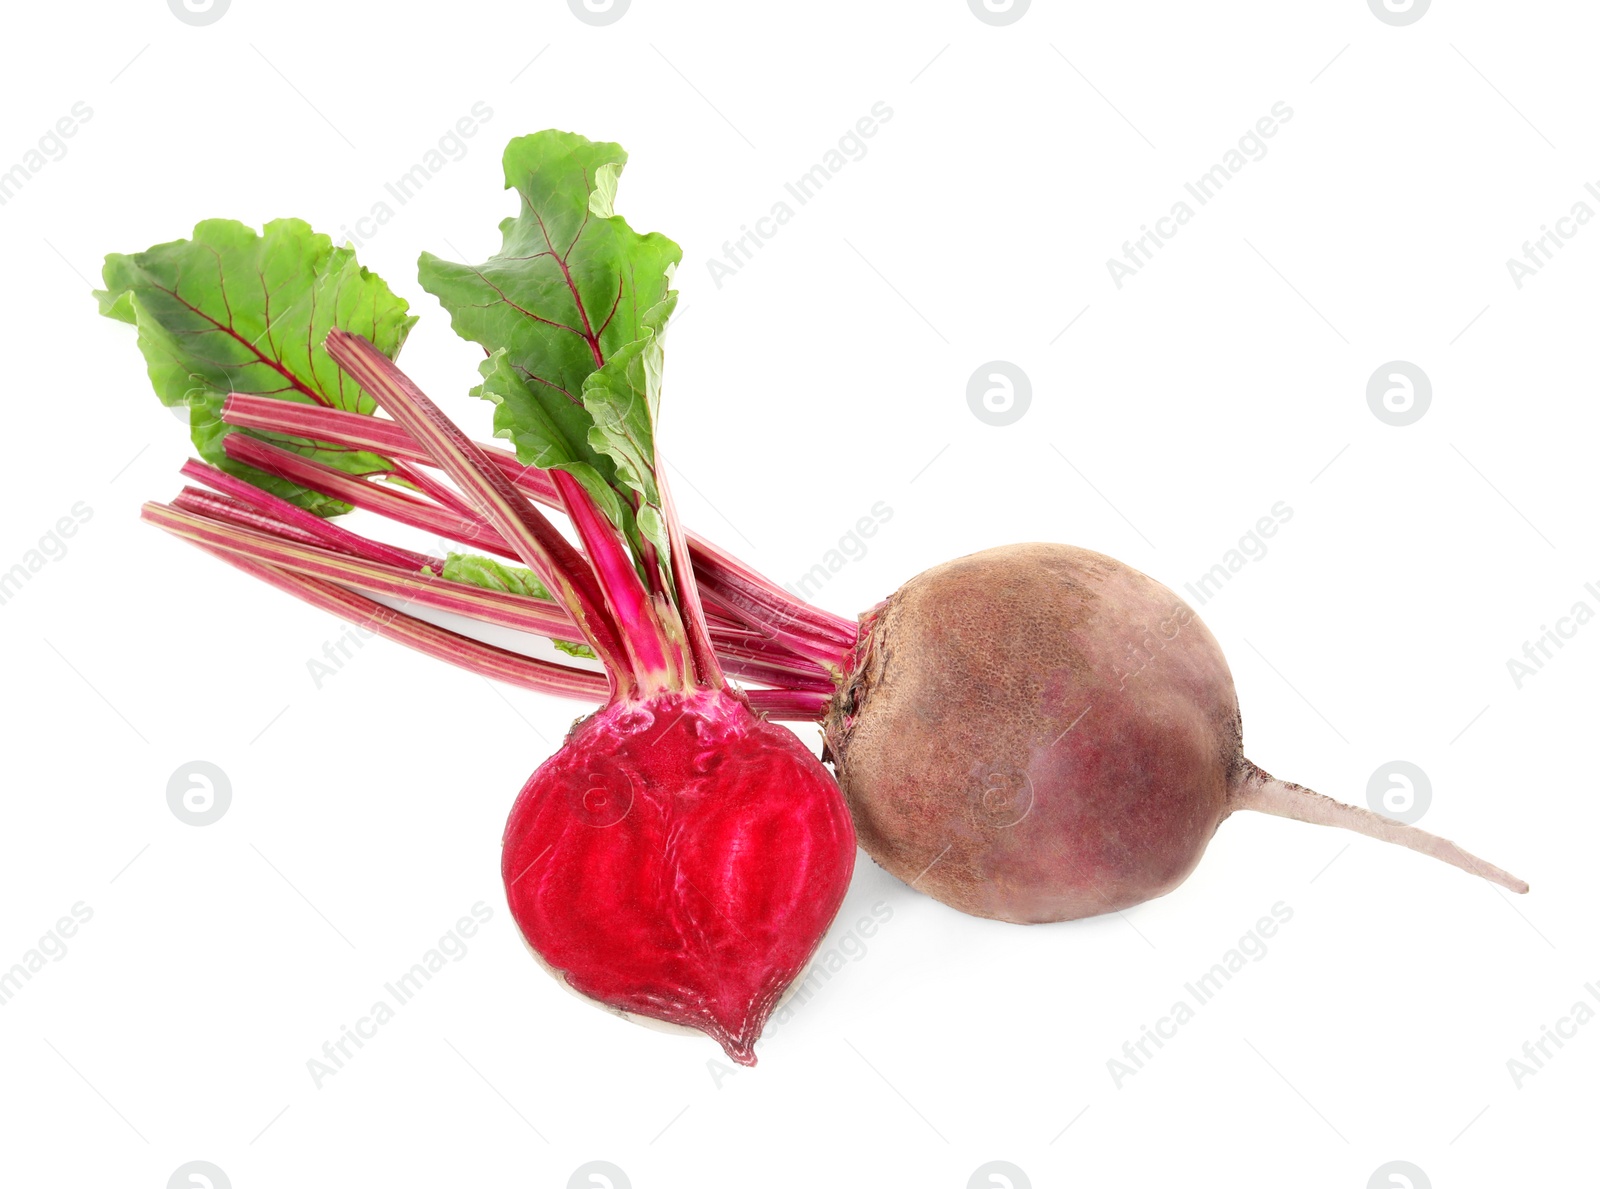 Photo of Raw ripe beets with stems isolated on white